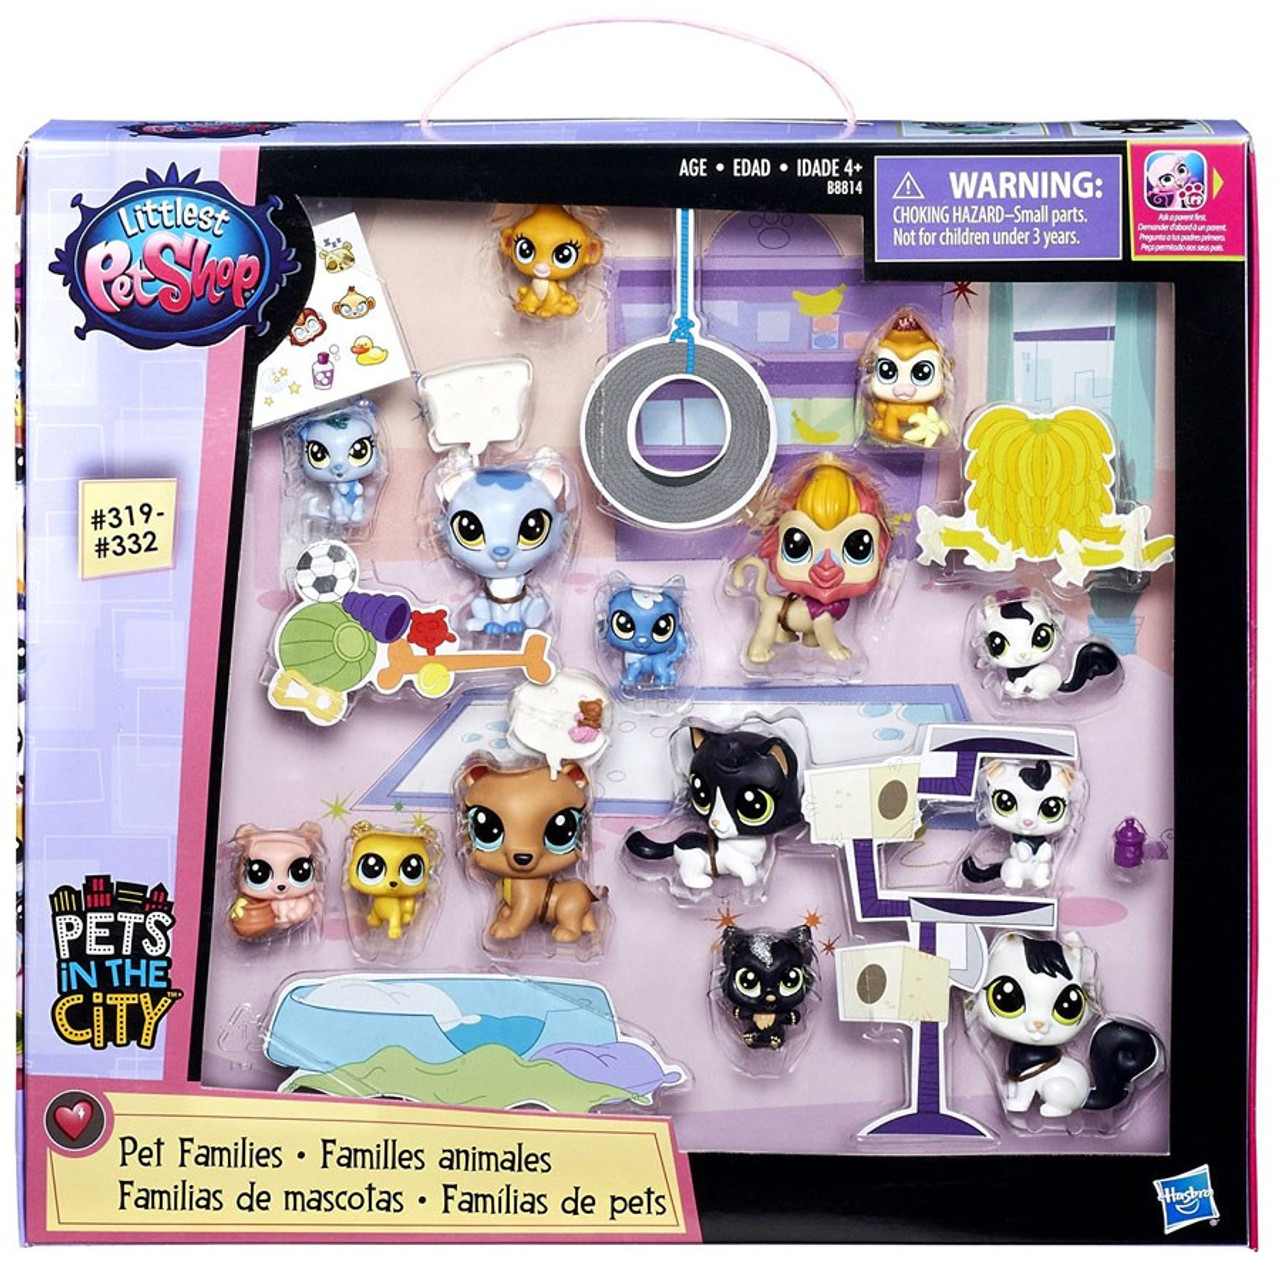 littlest-pet-shop-pets-in-the-city-pet-families-collection-mini-figure-14-pack-hasbro-toys-toywiz